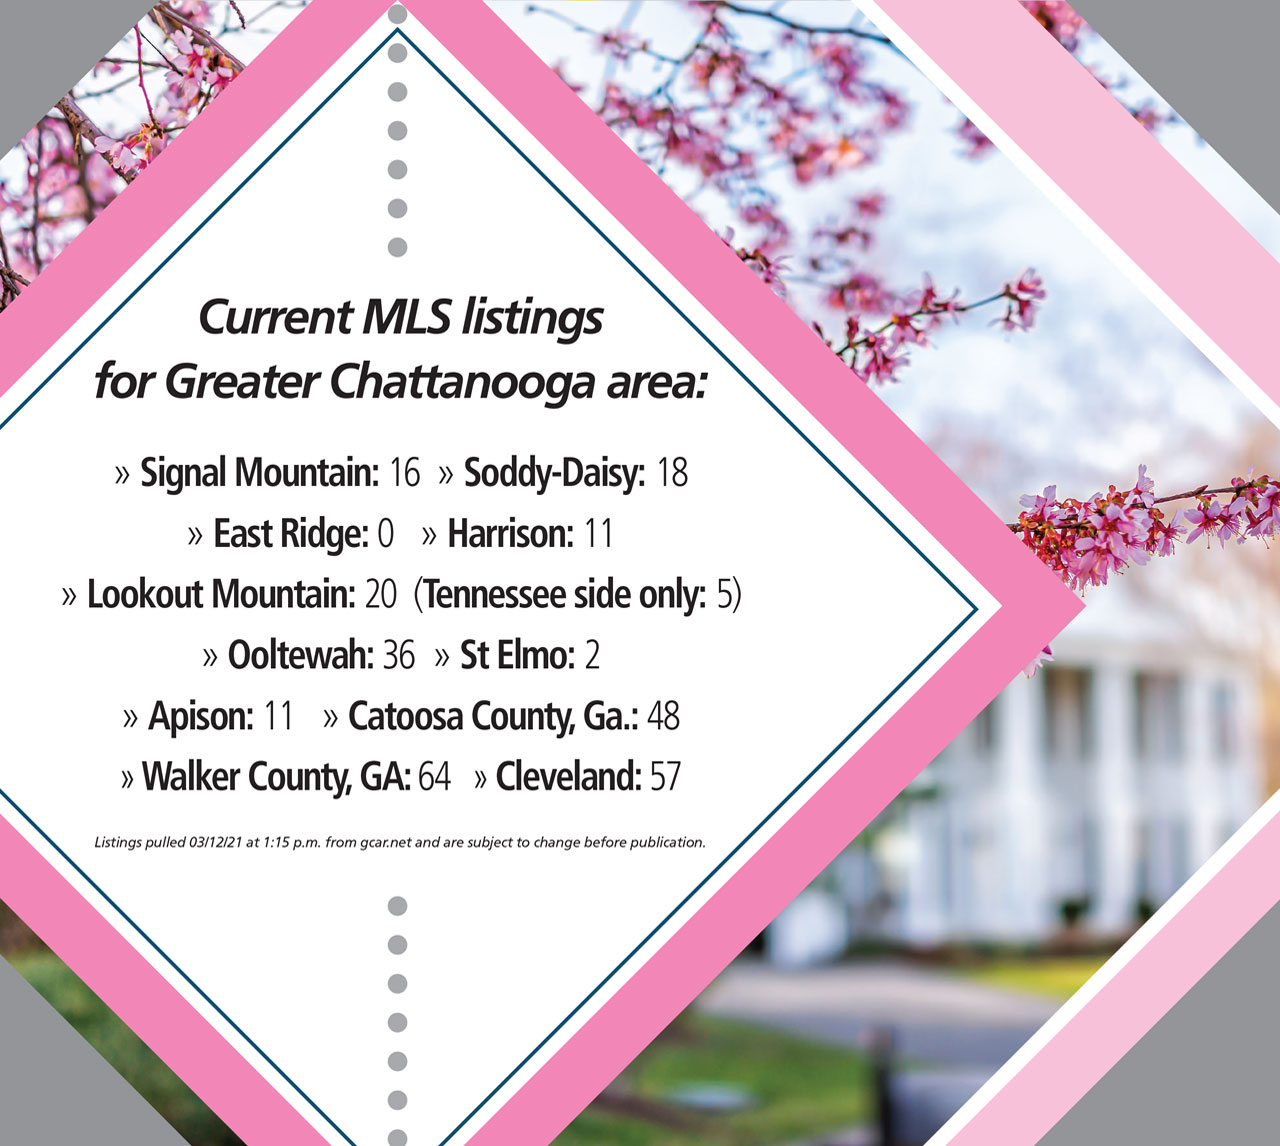 Chattanooga TN Homes for Sale in Signal Mountain, Soddy Daisy, Lookout Mountain, Hamilton County, Cleveland and More